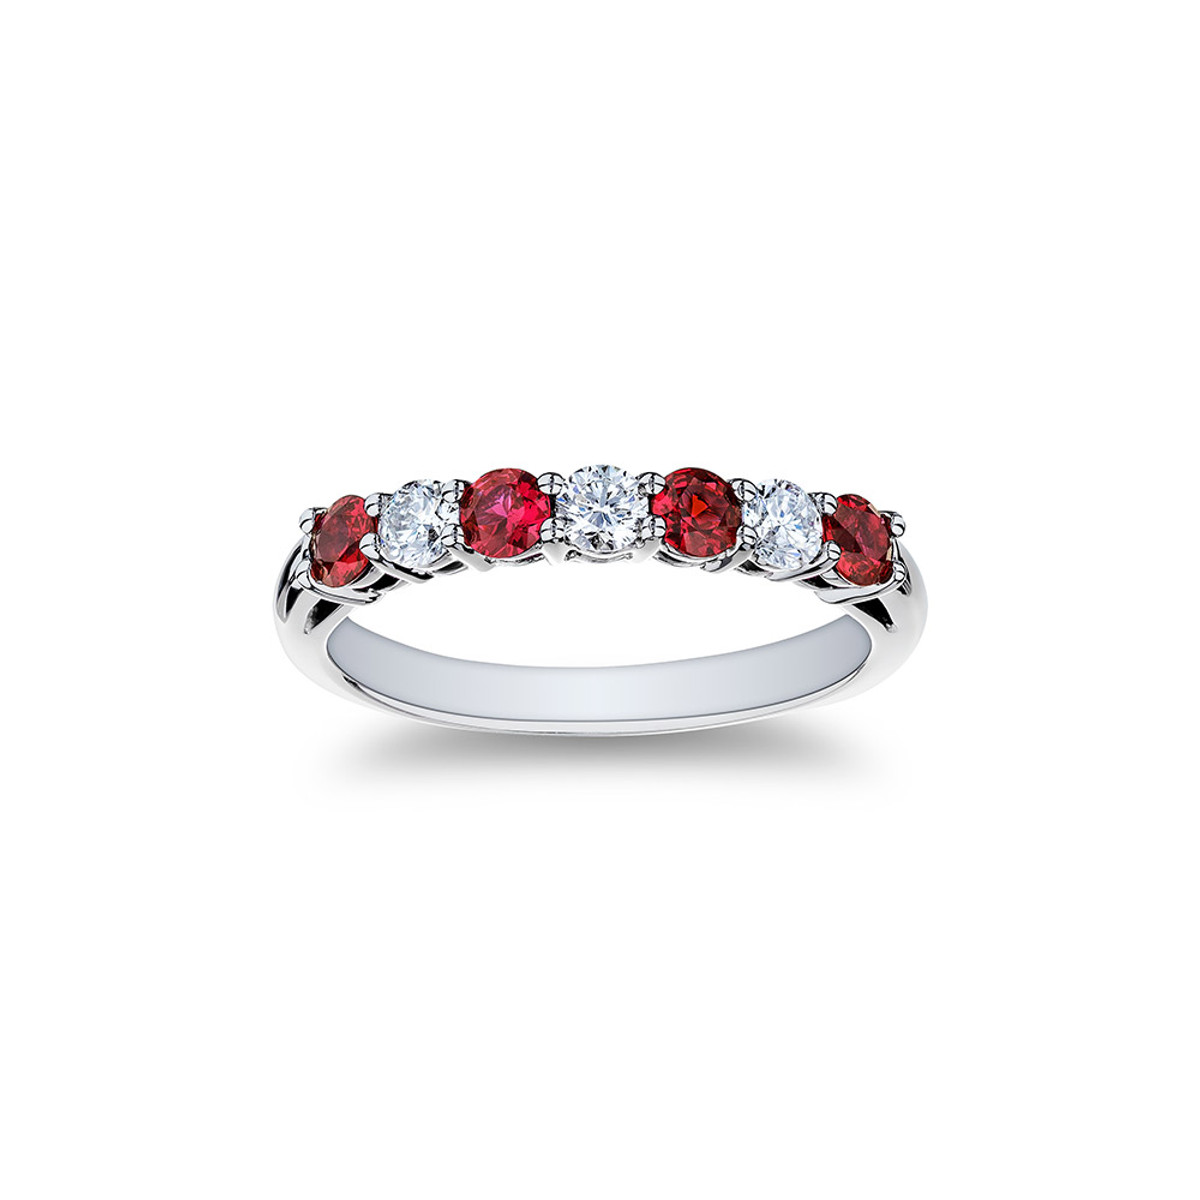 PLATINUM DIAMOND AND RUBY BAND 3RB=0.30CTTW 4RUBY=0.50CTTW-43306